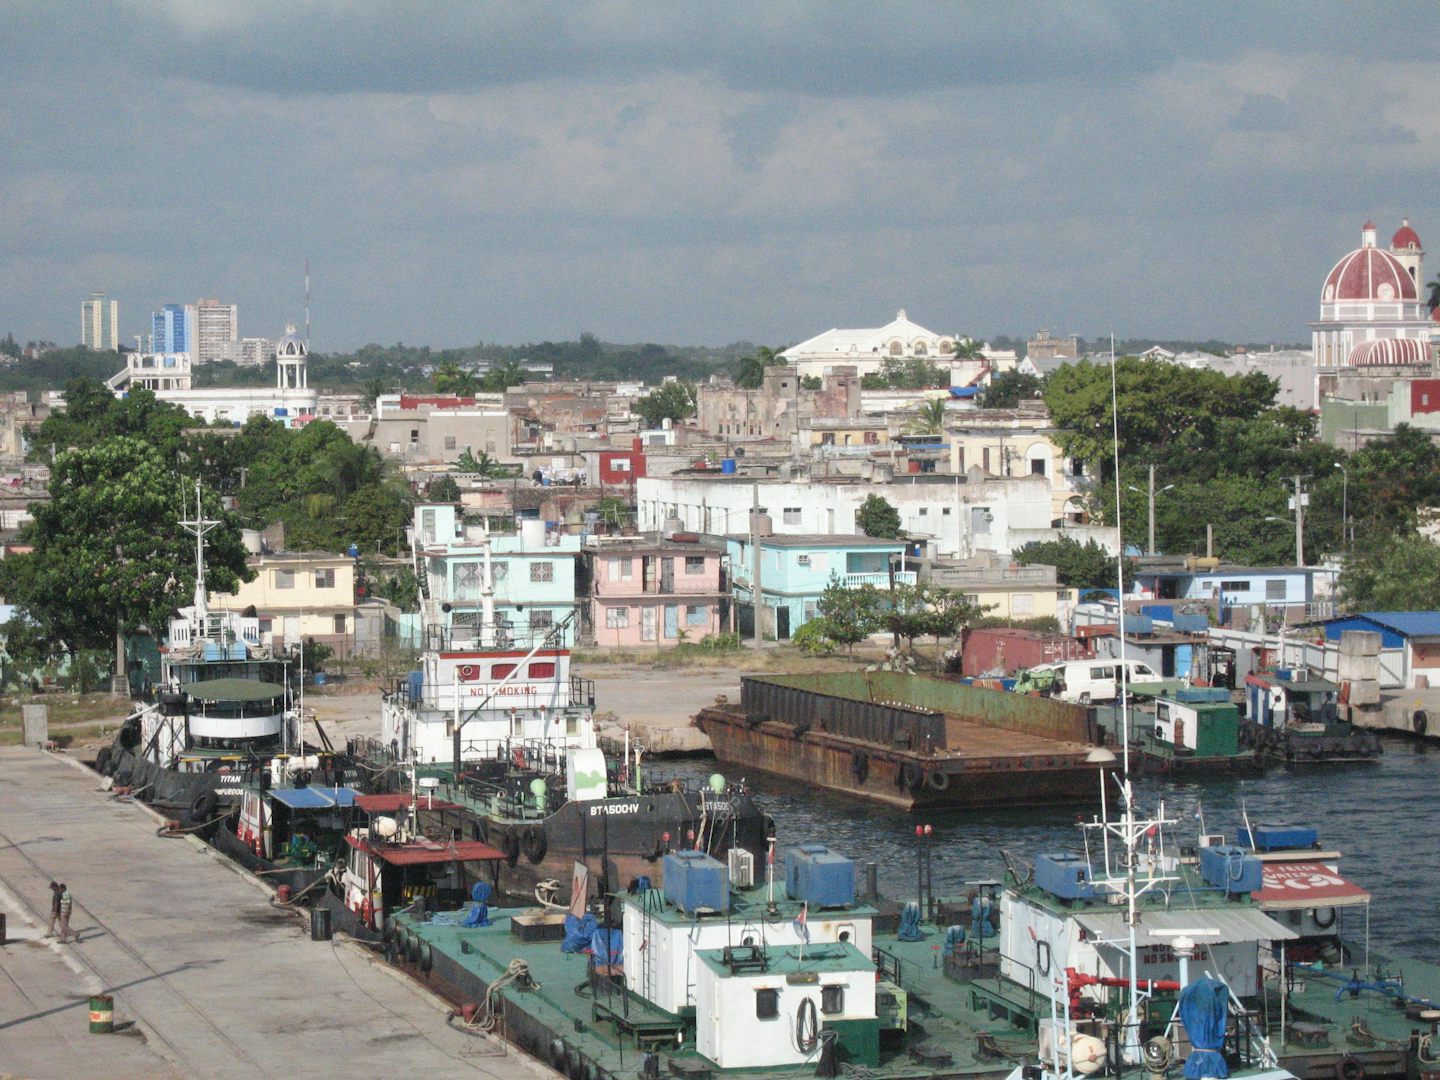 Cienfuegos from the ship